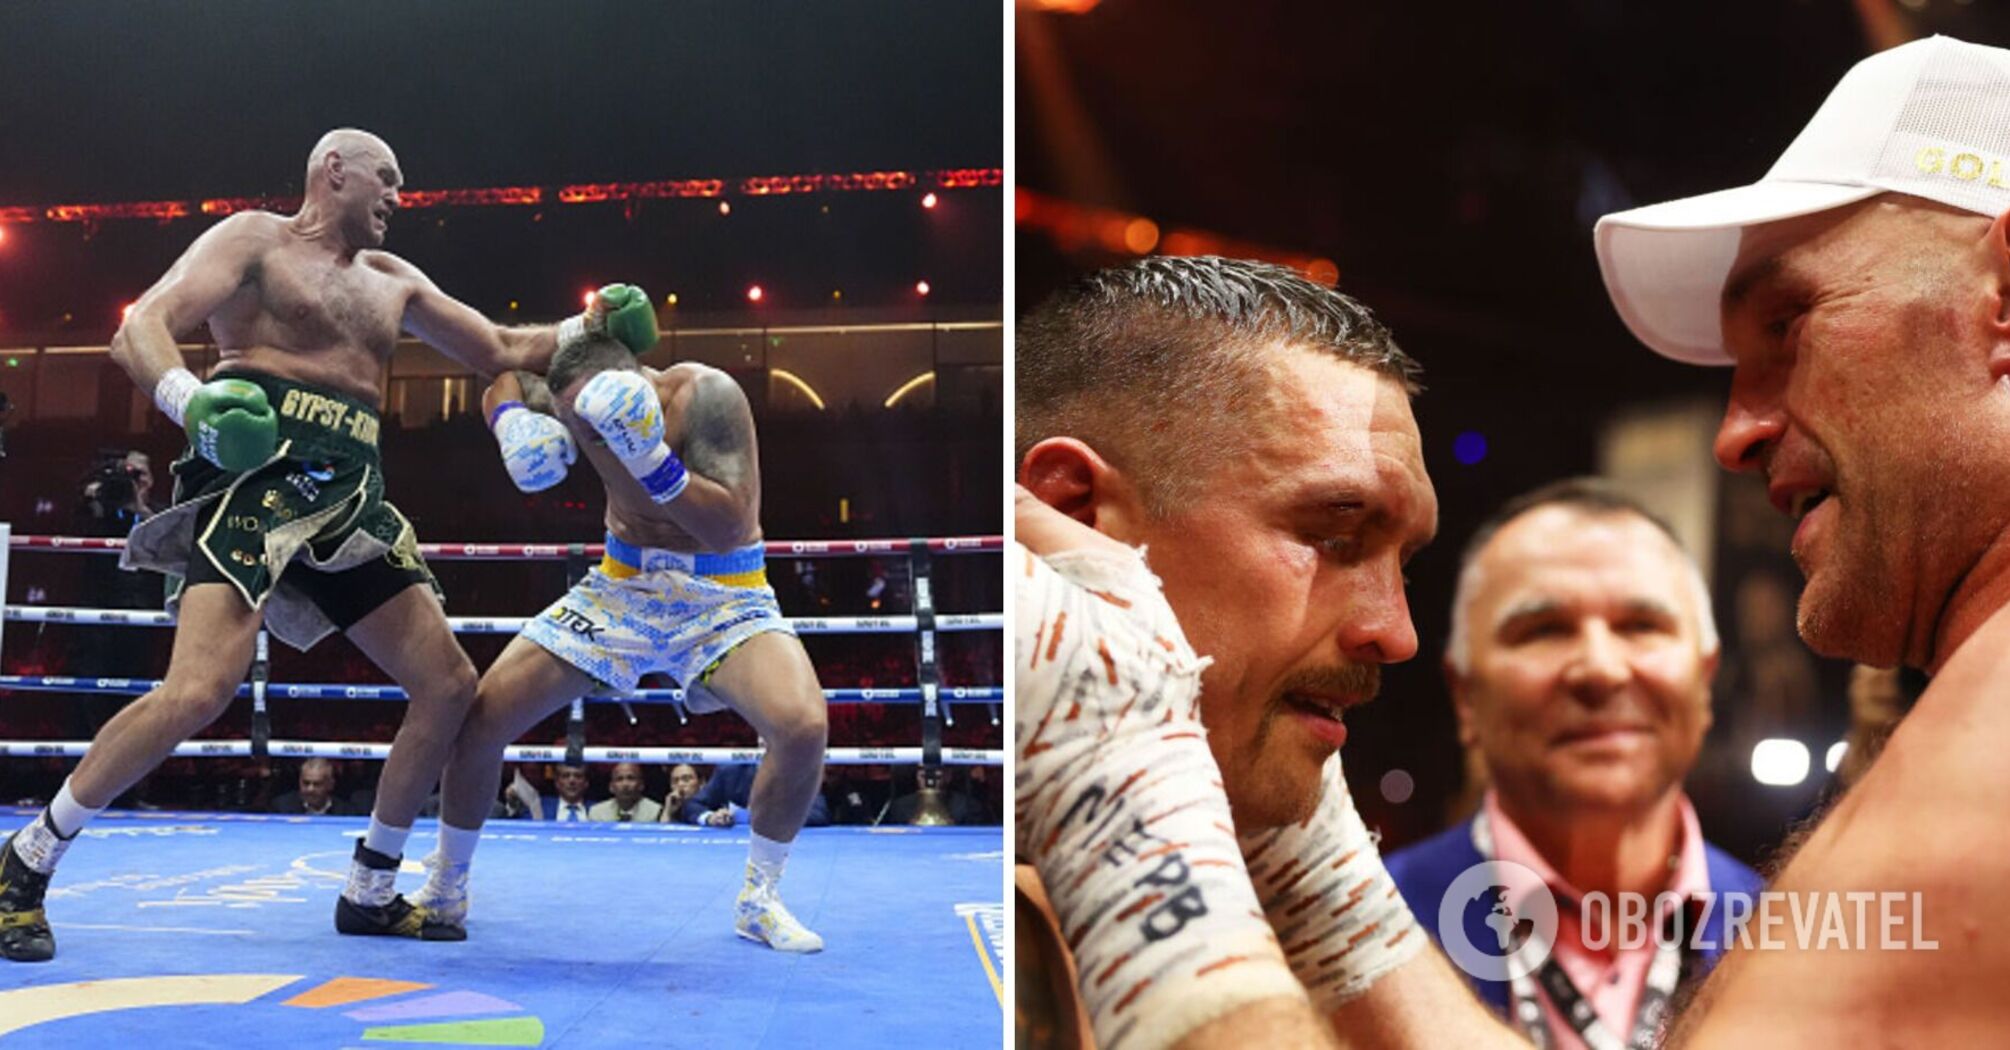 An important rule may be introduced for the Usyk-Fury rematch